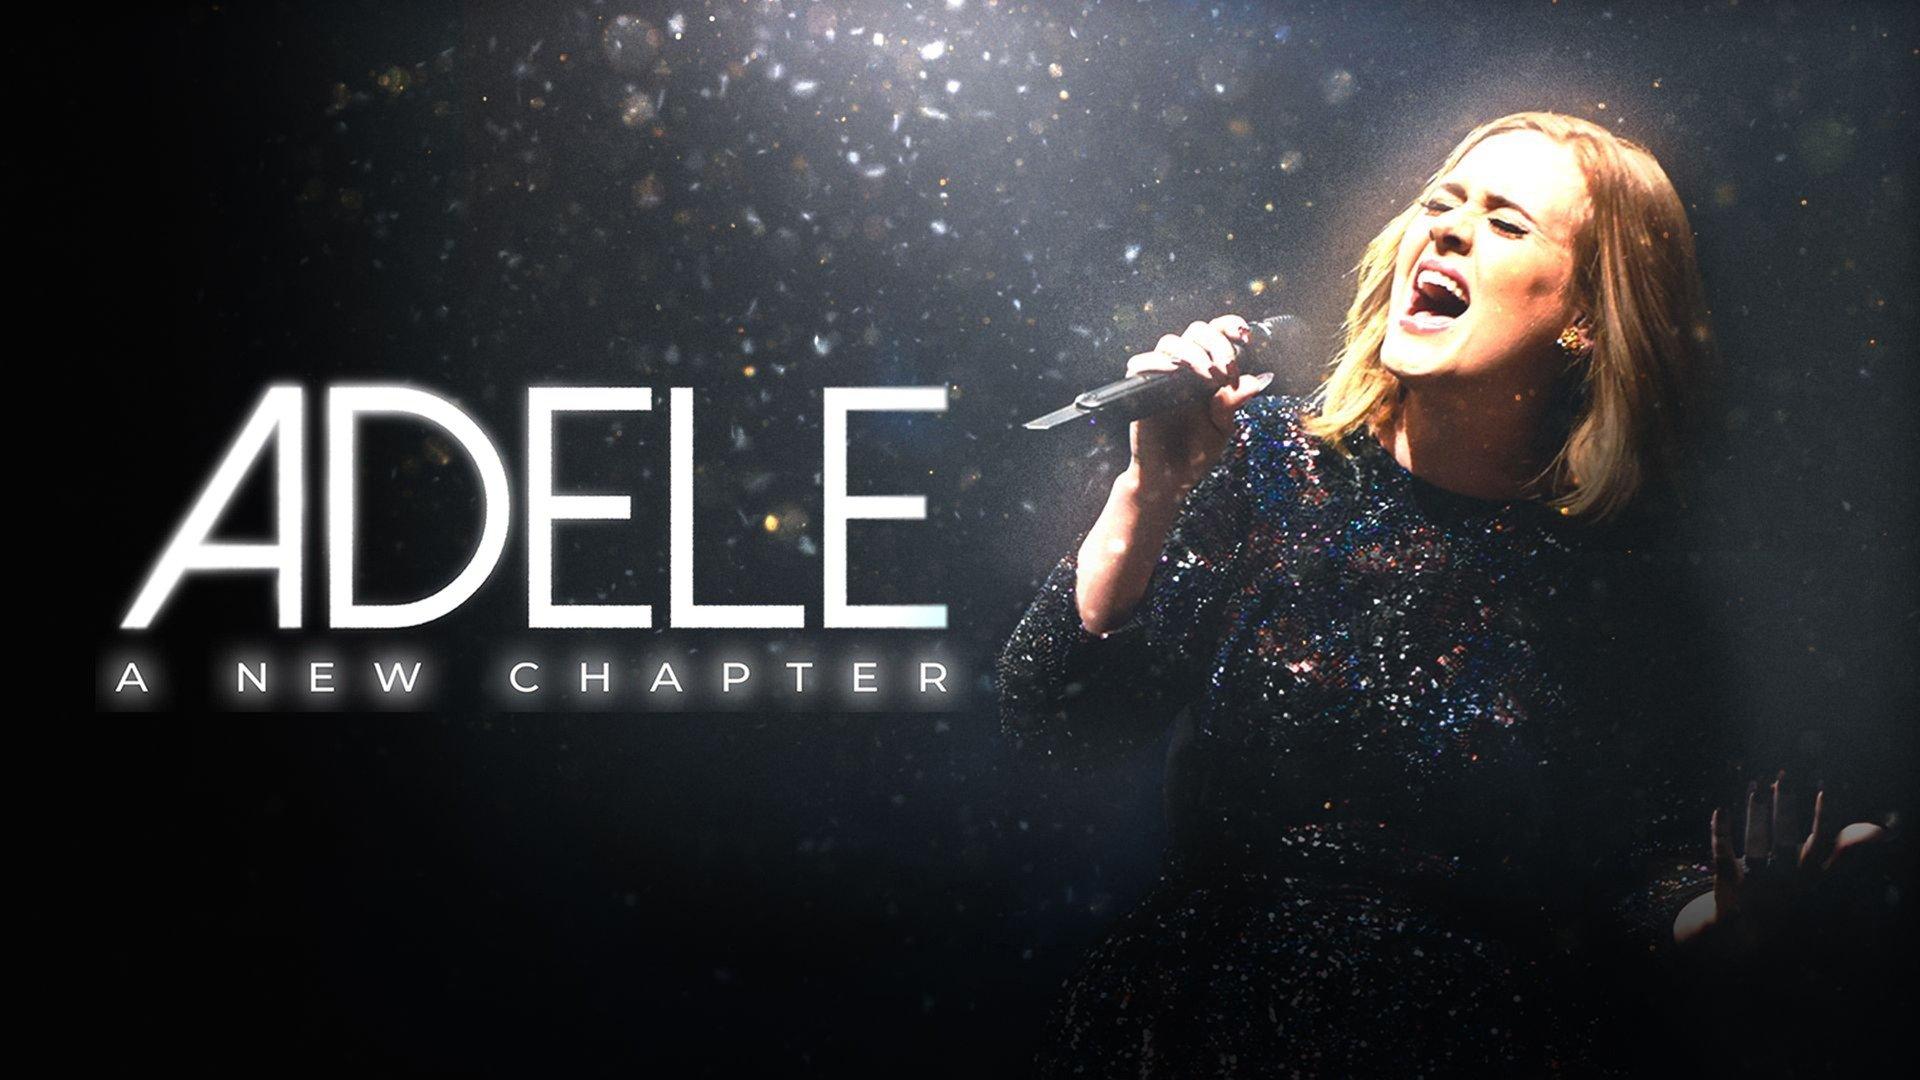 Watch Adele A New Chapter Streaming Online on Philo (Free Trial)